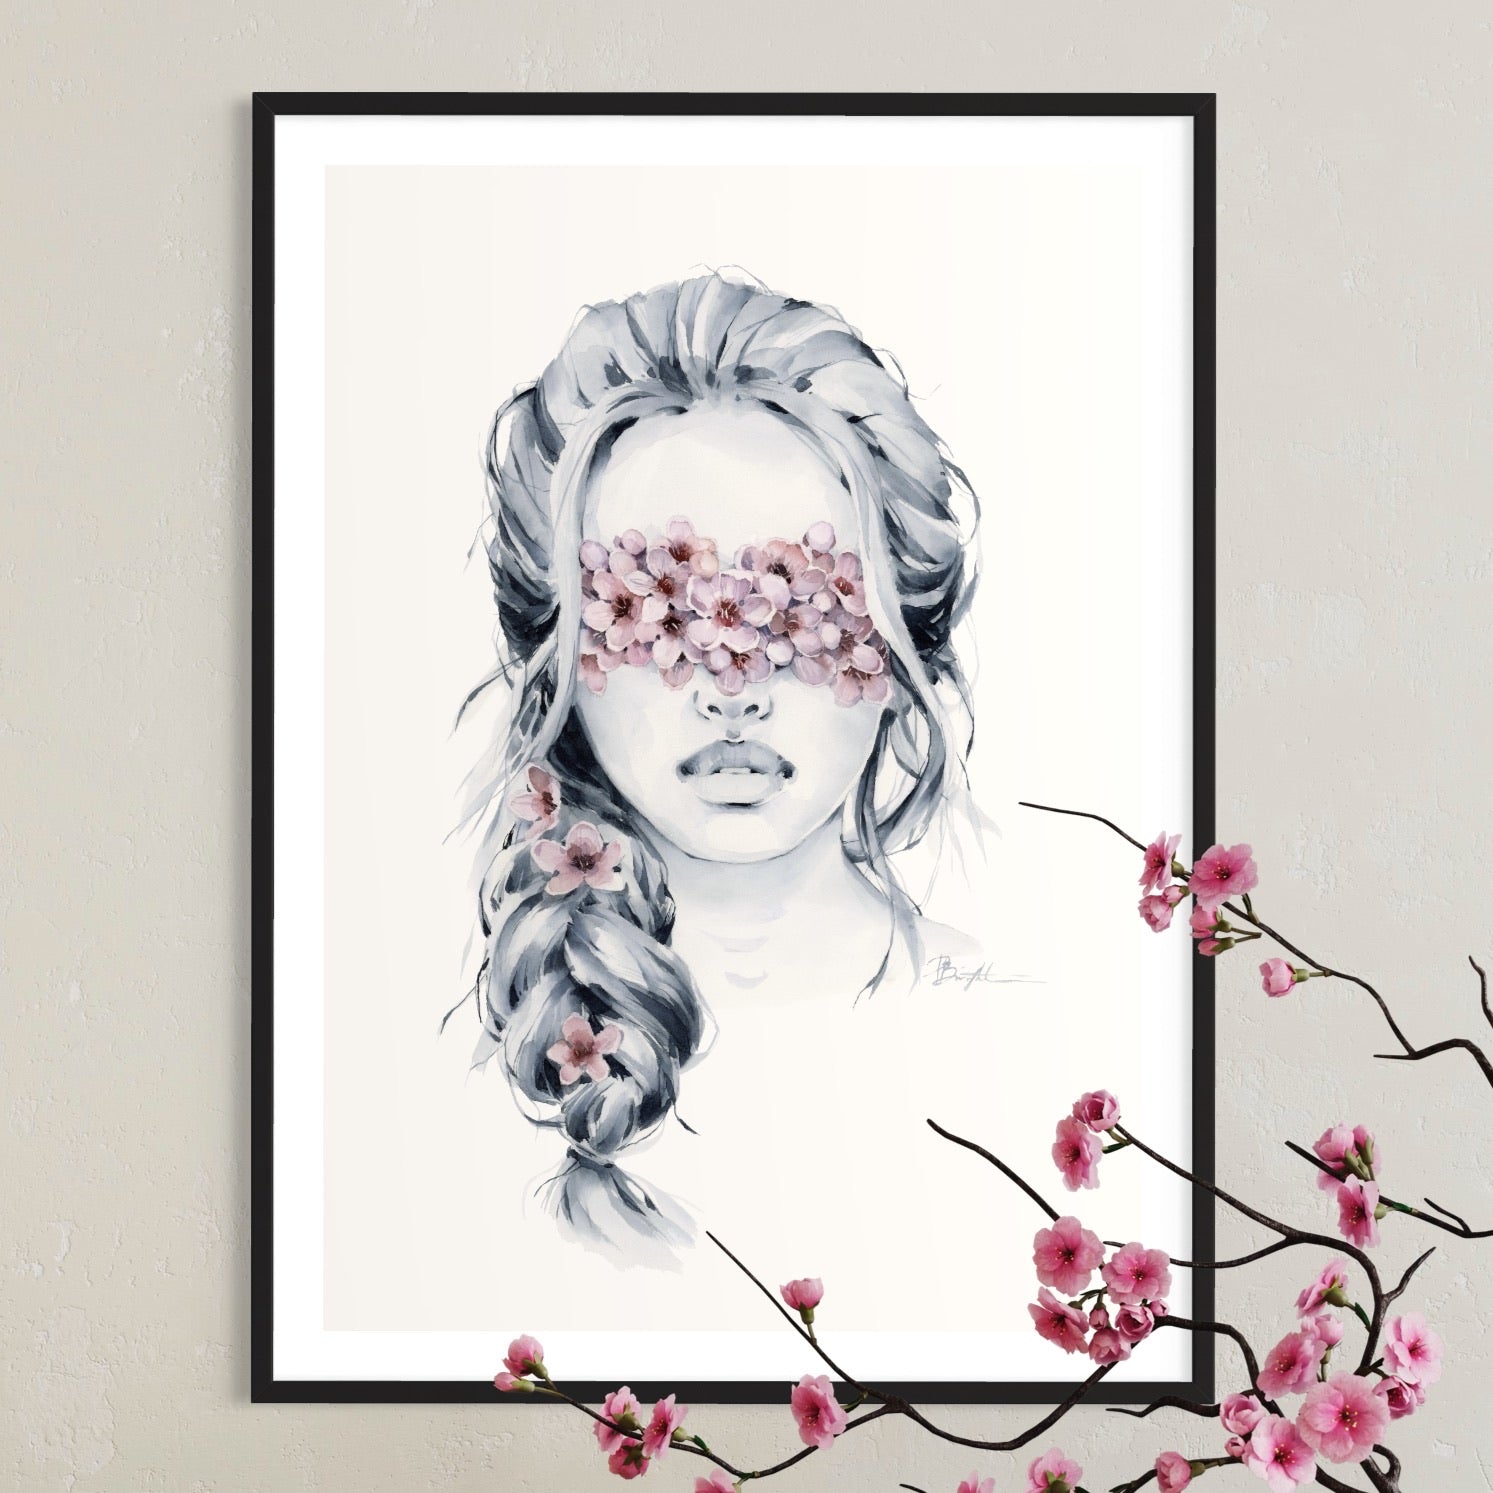 Cherry Blossom blindfolded print by Polina Bright in interior